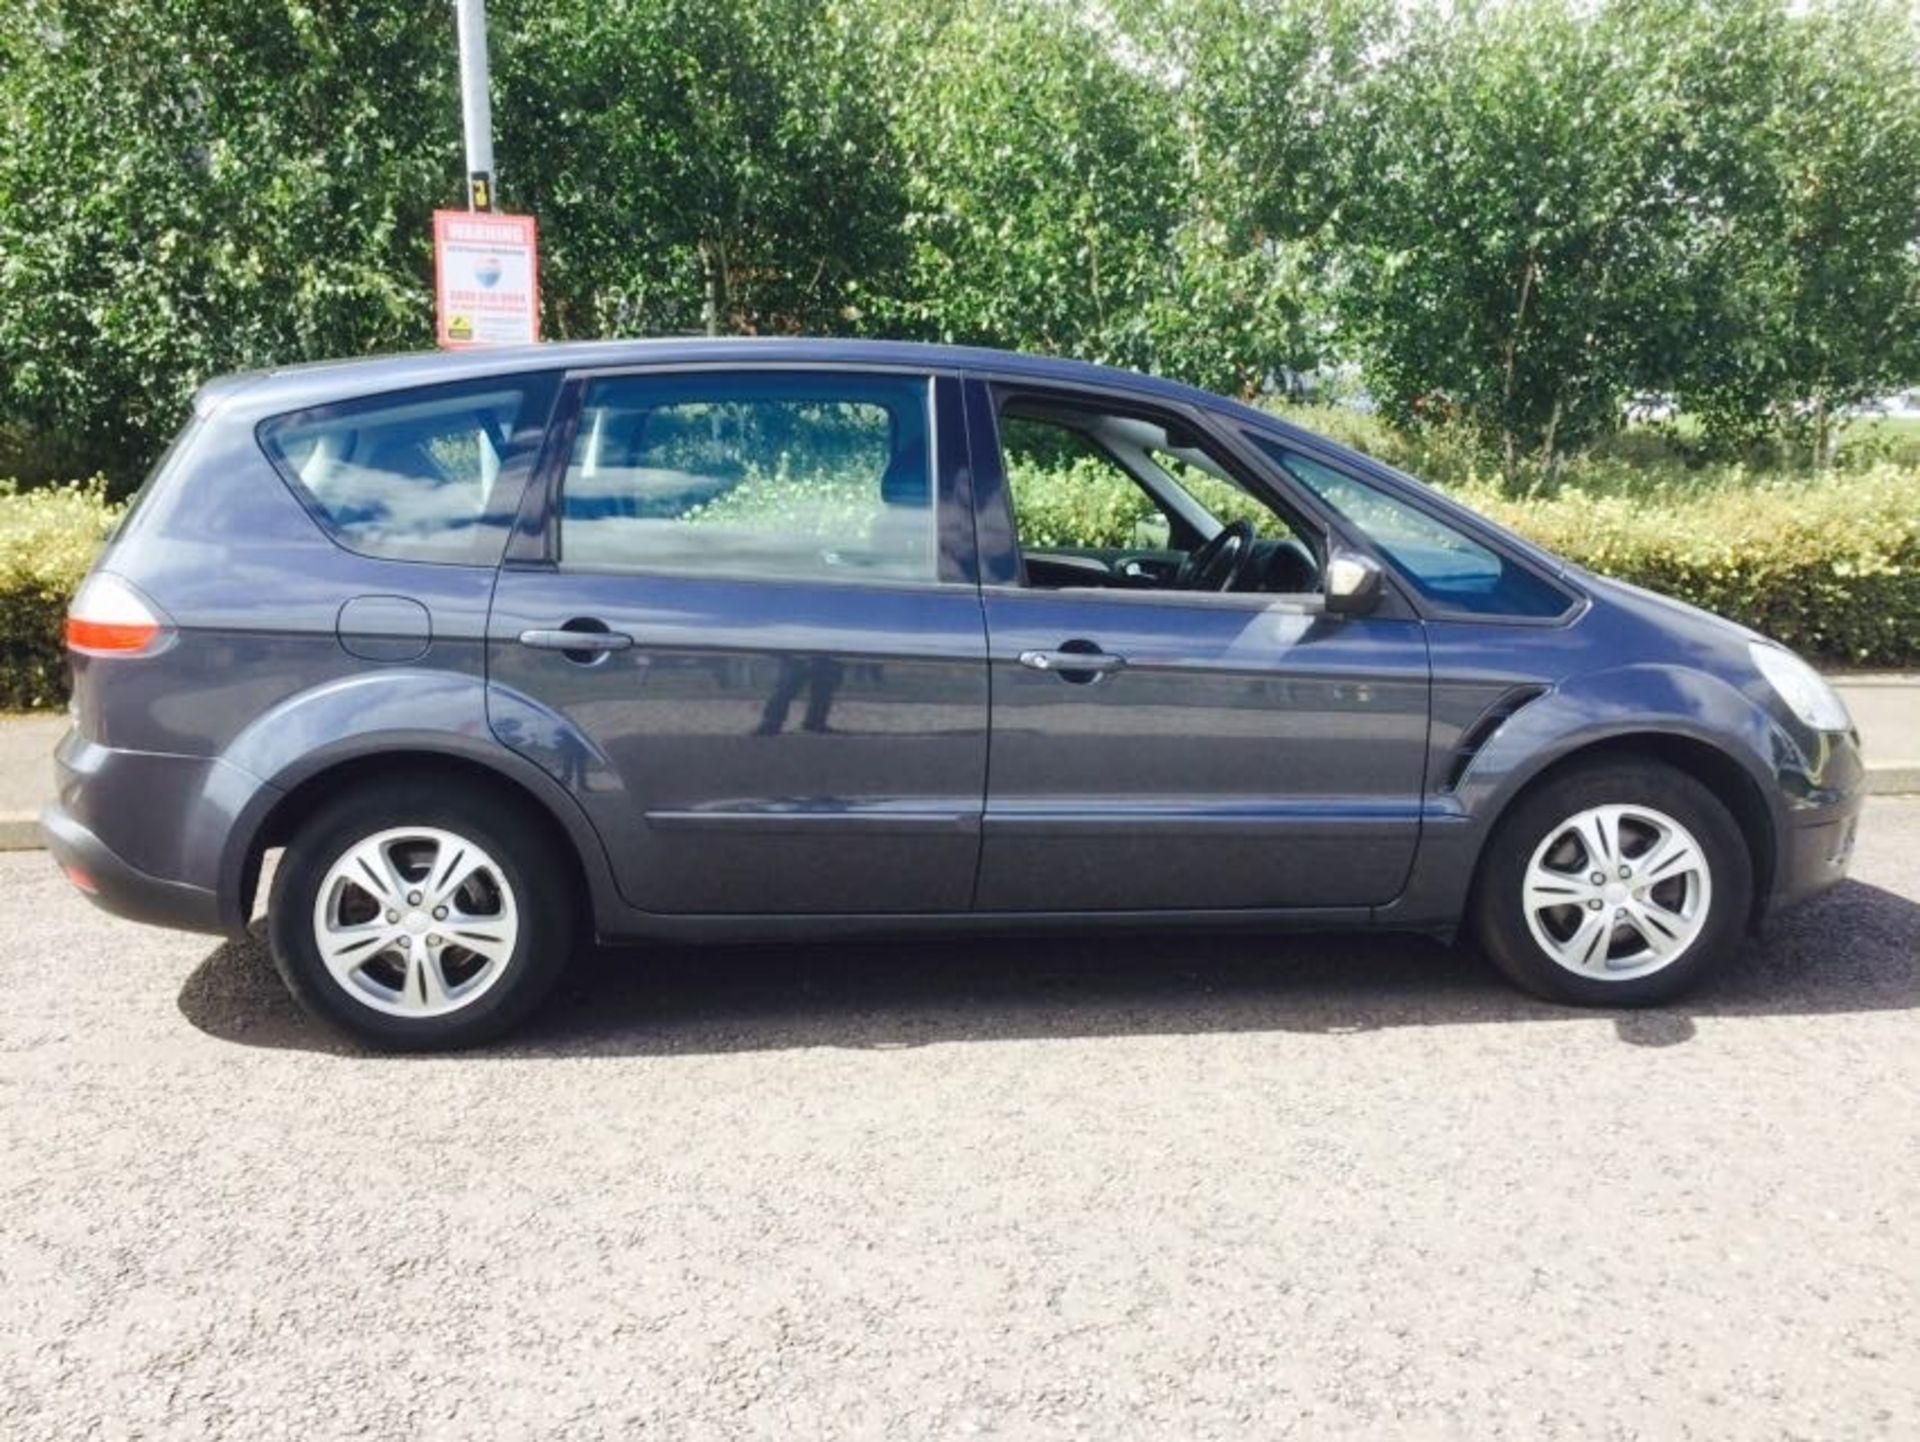 On Sale FORD S MAX 2.0 TDCI "ZETEC" 7 SEATER MPV - NEW SHAPE - ONLY 88K MILES - AIR CON - ELEC PACK - Image 6 of 16